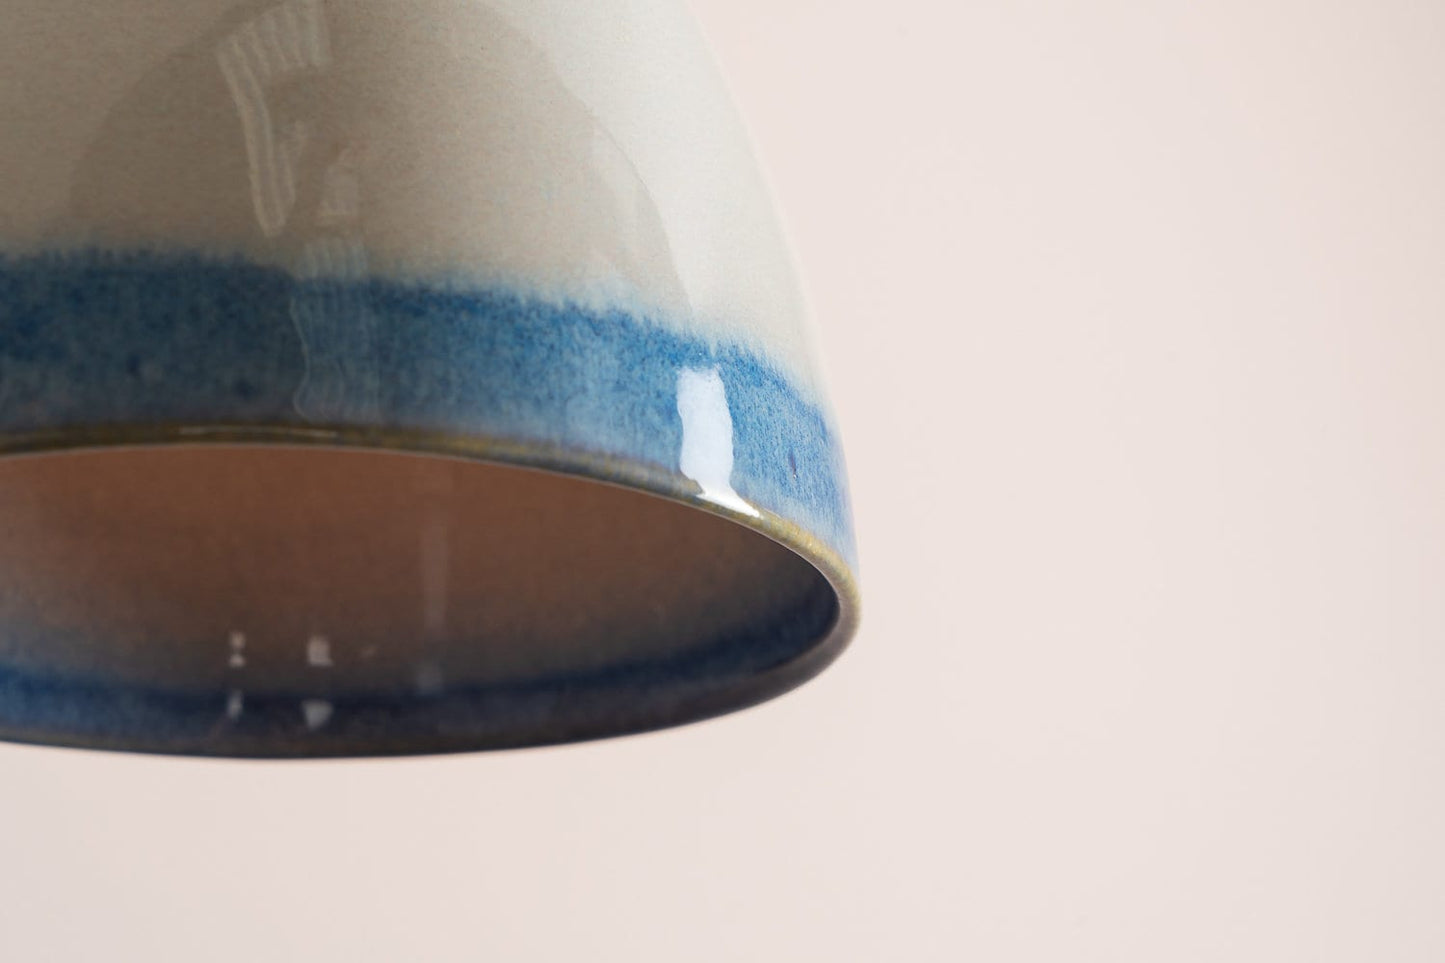 Element pendant light in ceramic and oak - small: blue and white by StudioHaran